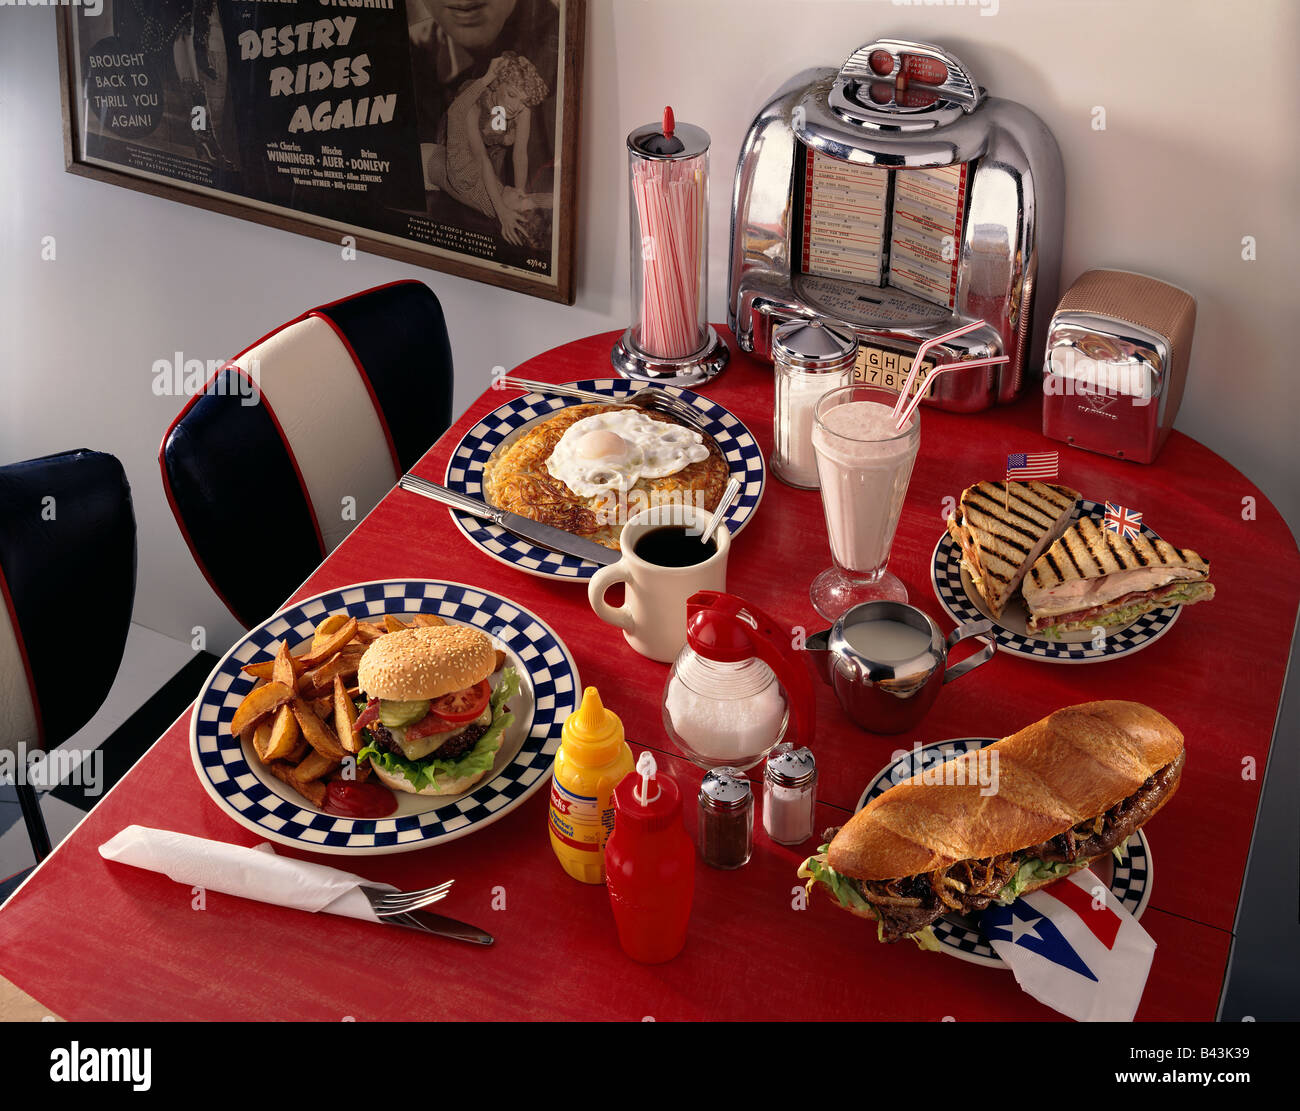 An American Diner Editorial Food Stock Photo Alamy